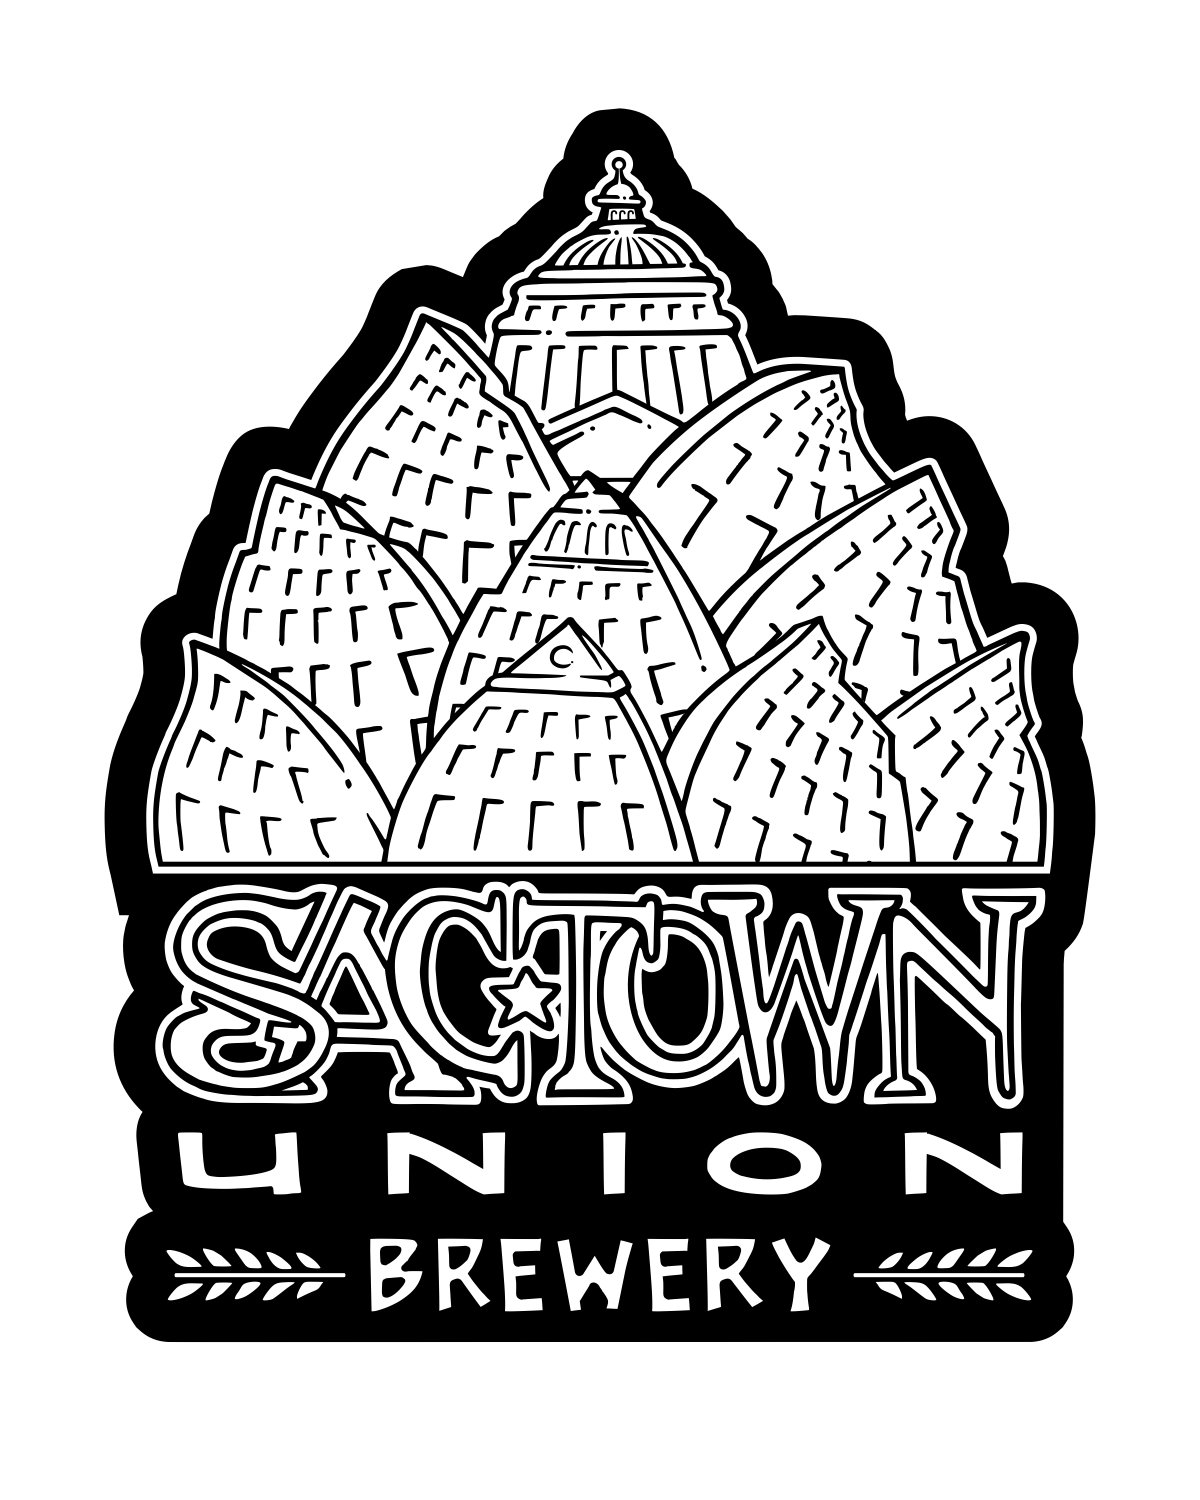 SACTOWN UNION BREWERY